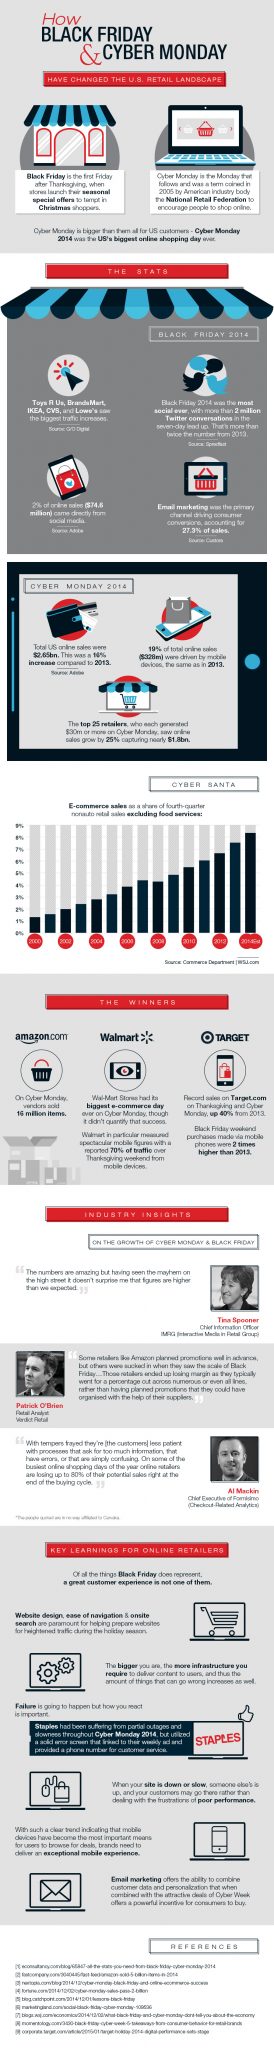 Black Friday & Cyber Monday Infographic - USA